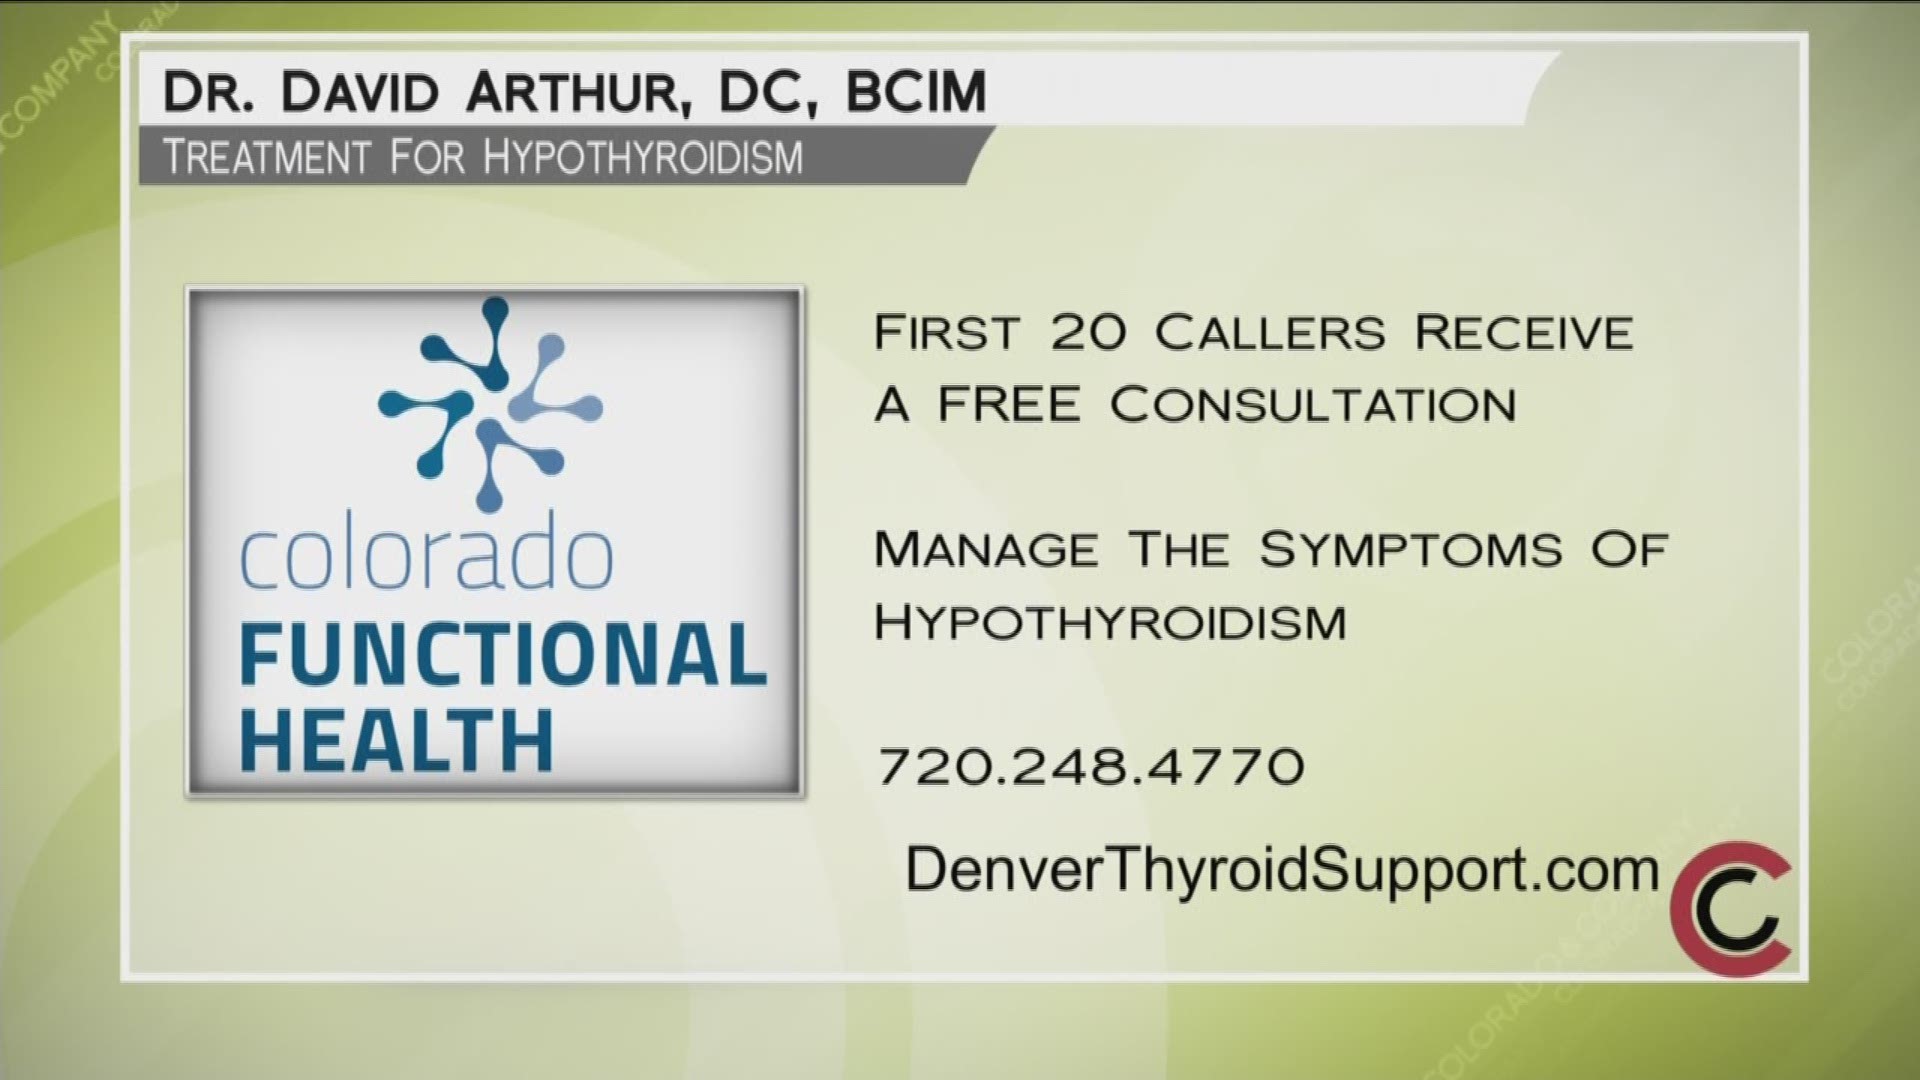 Dr. David Arthur has reserved 20 free initial consultations for first-time callers who have been previously diagnosed and are taking medication for low thyroid. Mention Colorado and Company when you call 720.248.4770. You can also learn more about Dr. Arthur and how he can help you at www.DenverThyroidSupport.com. 
THIS INTERVIEW HAS COMMERCIAL CONTENT. PRODUCTS AND SERVICES FEATURED APPEAR AS PAID ADVERTISING.